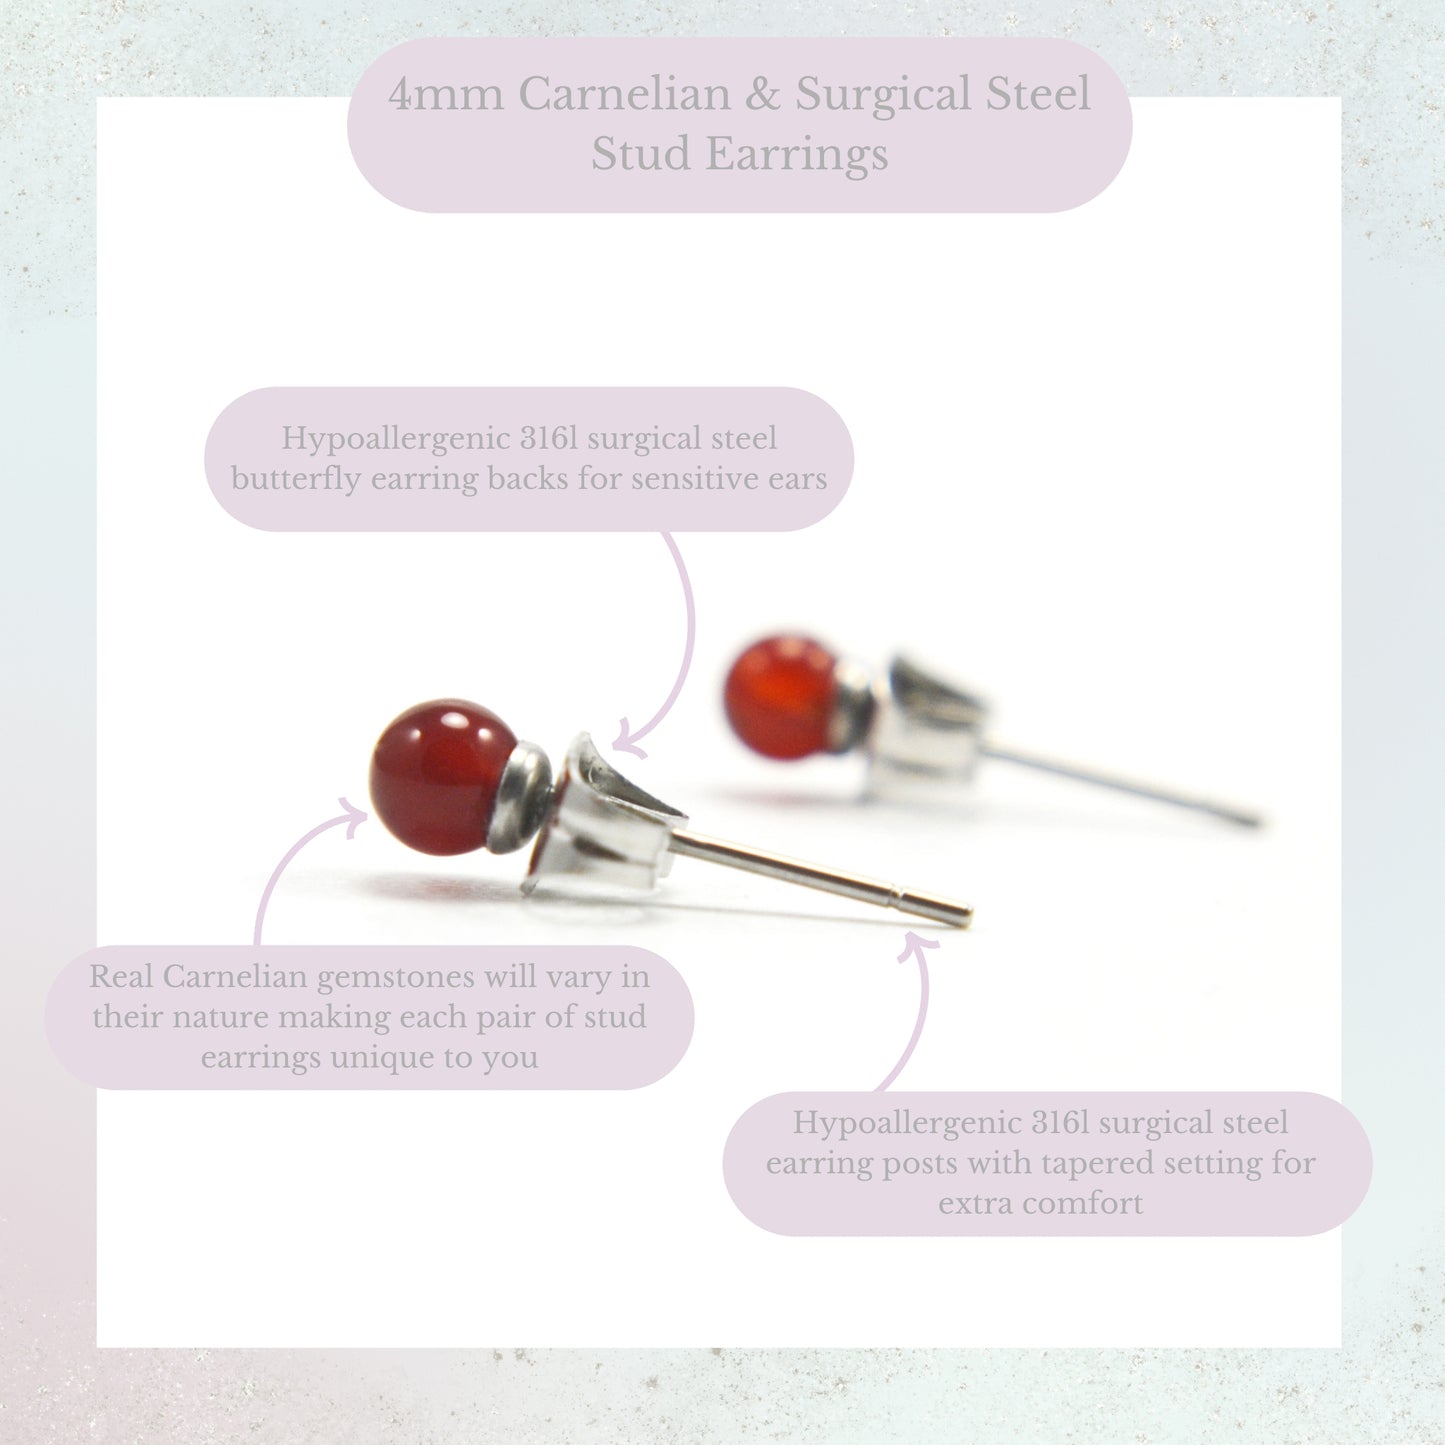 Product information graphic for 4mm Carnelian & surgical steel stud earrings